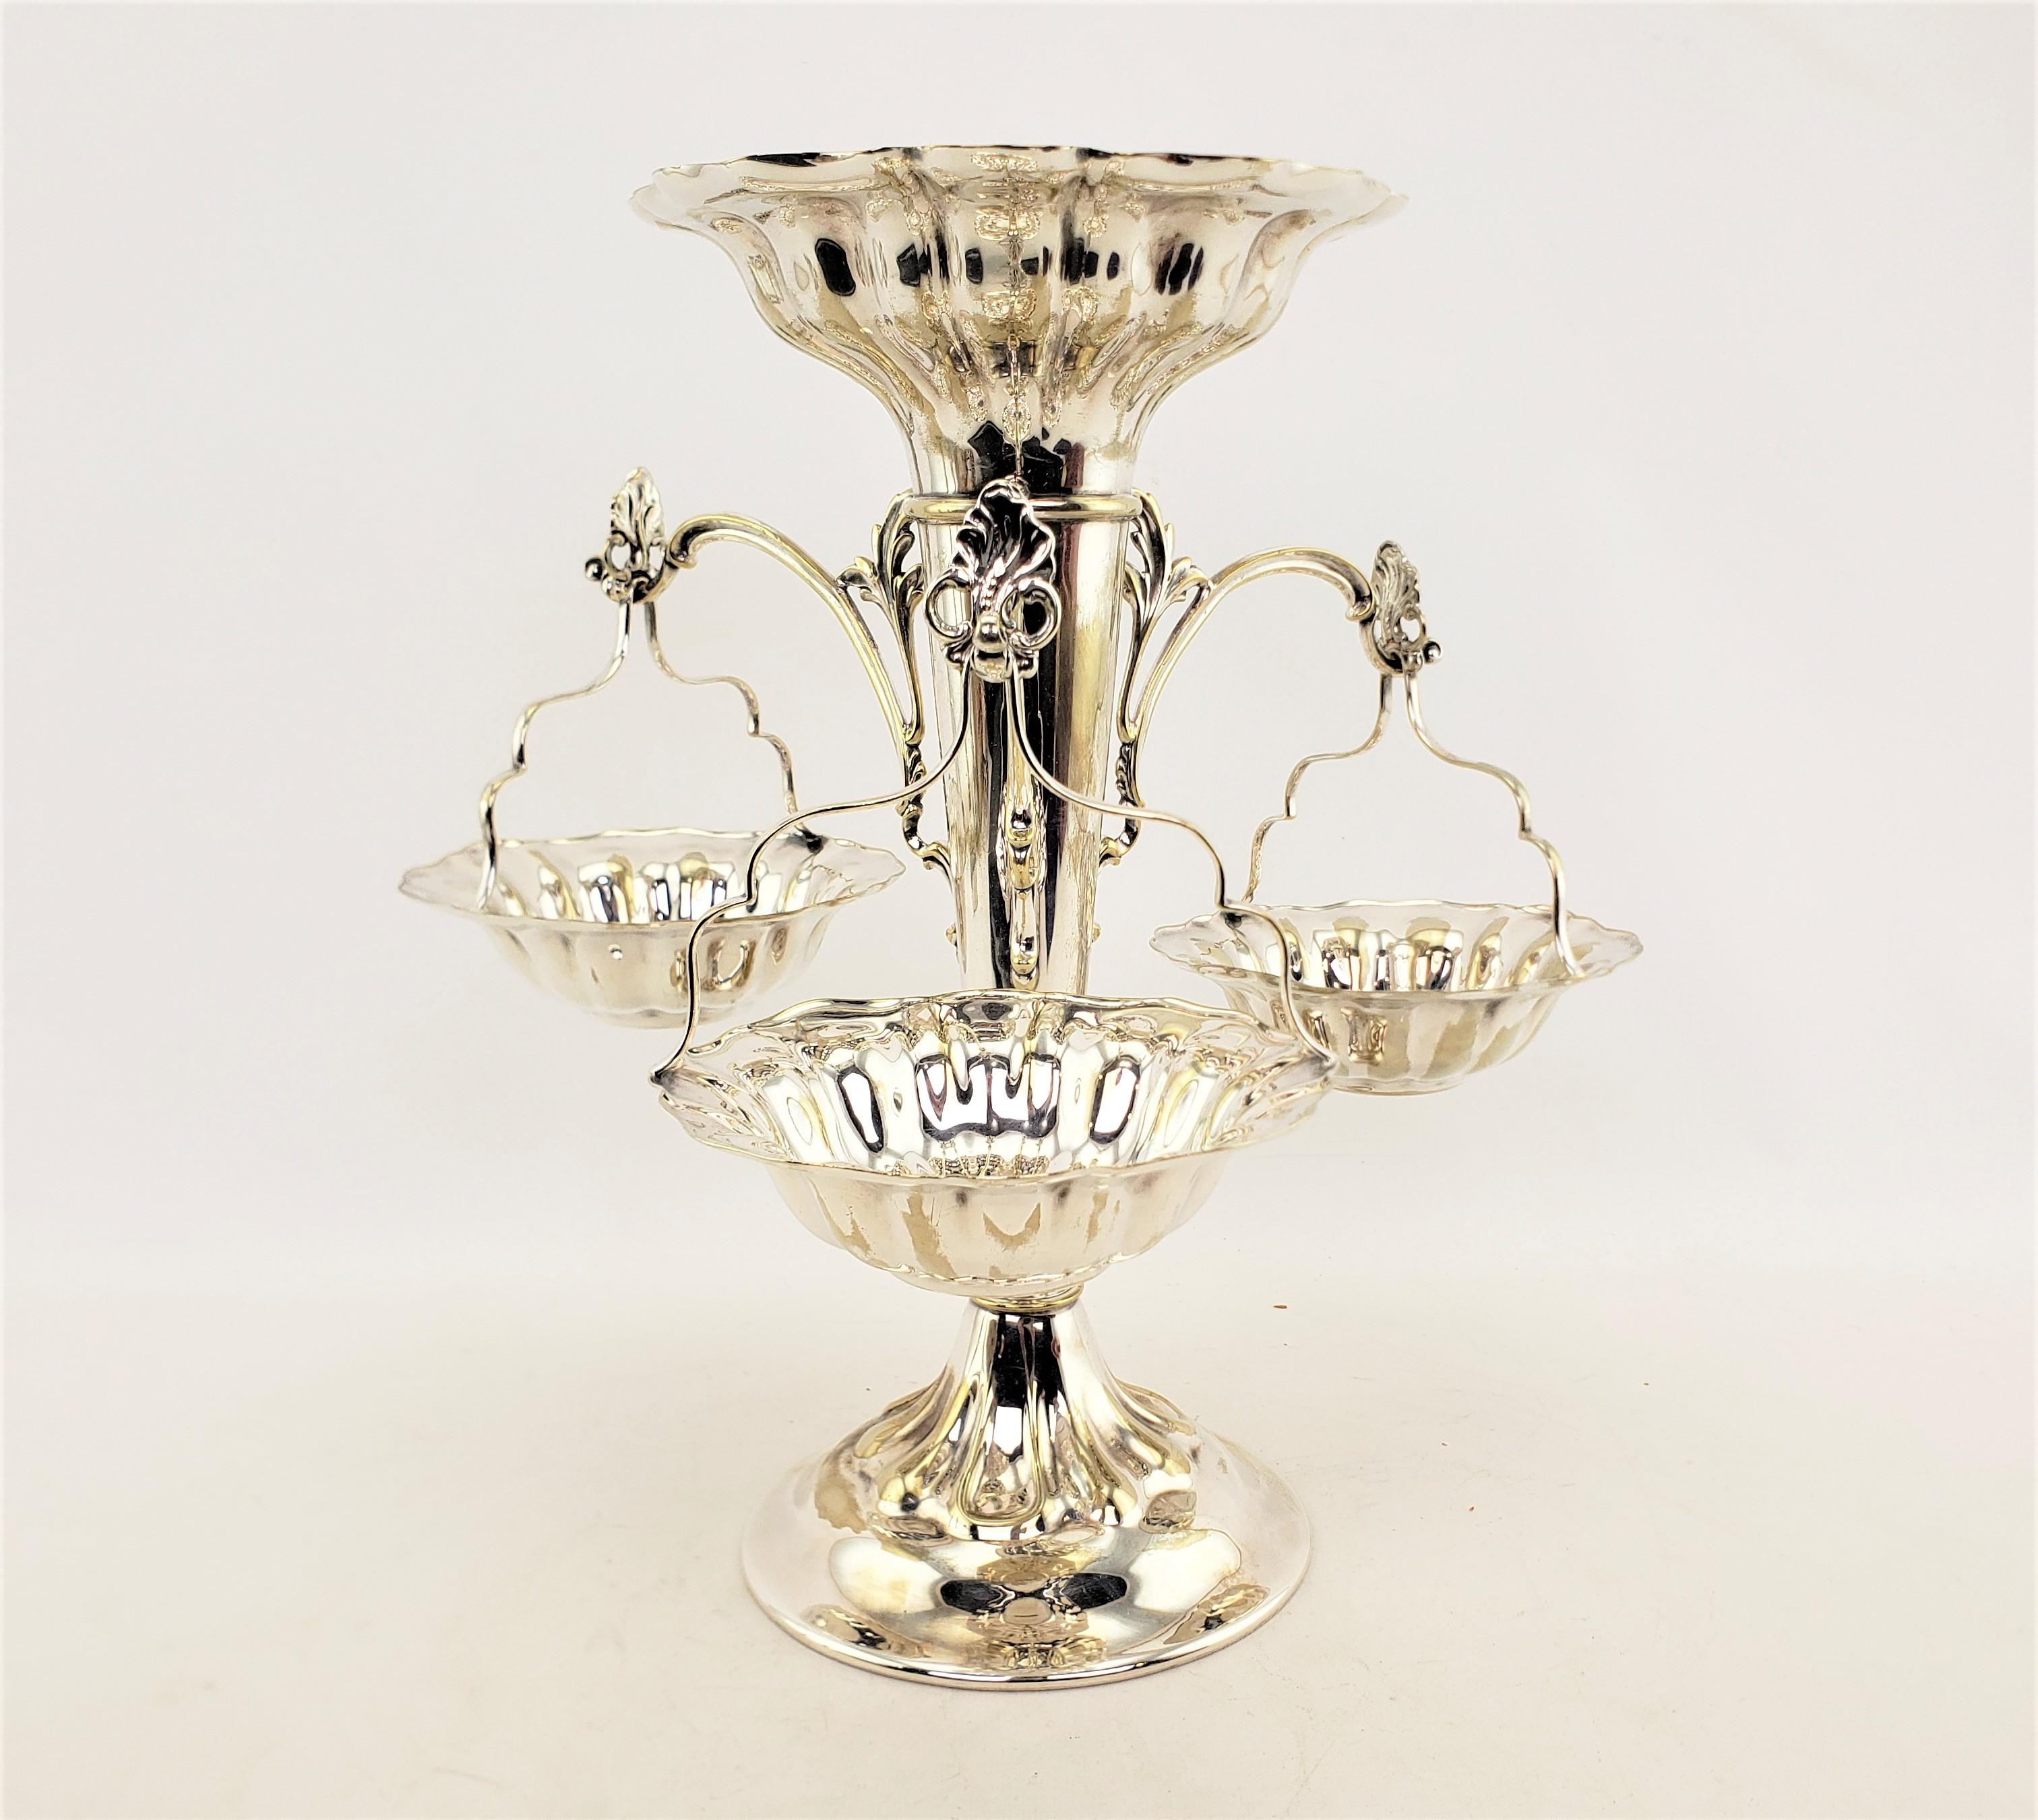 20th Century Antique English Elkington Silver Plated Epergne or Centerpiece with Side Baskets For Sale